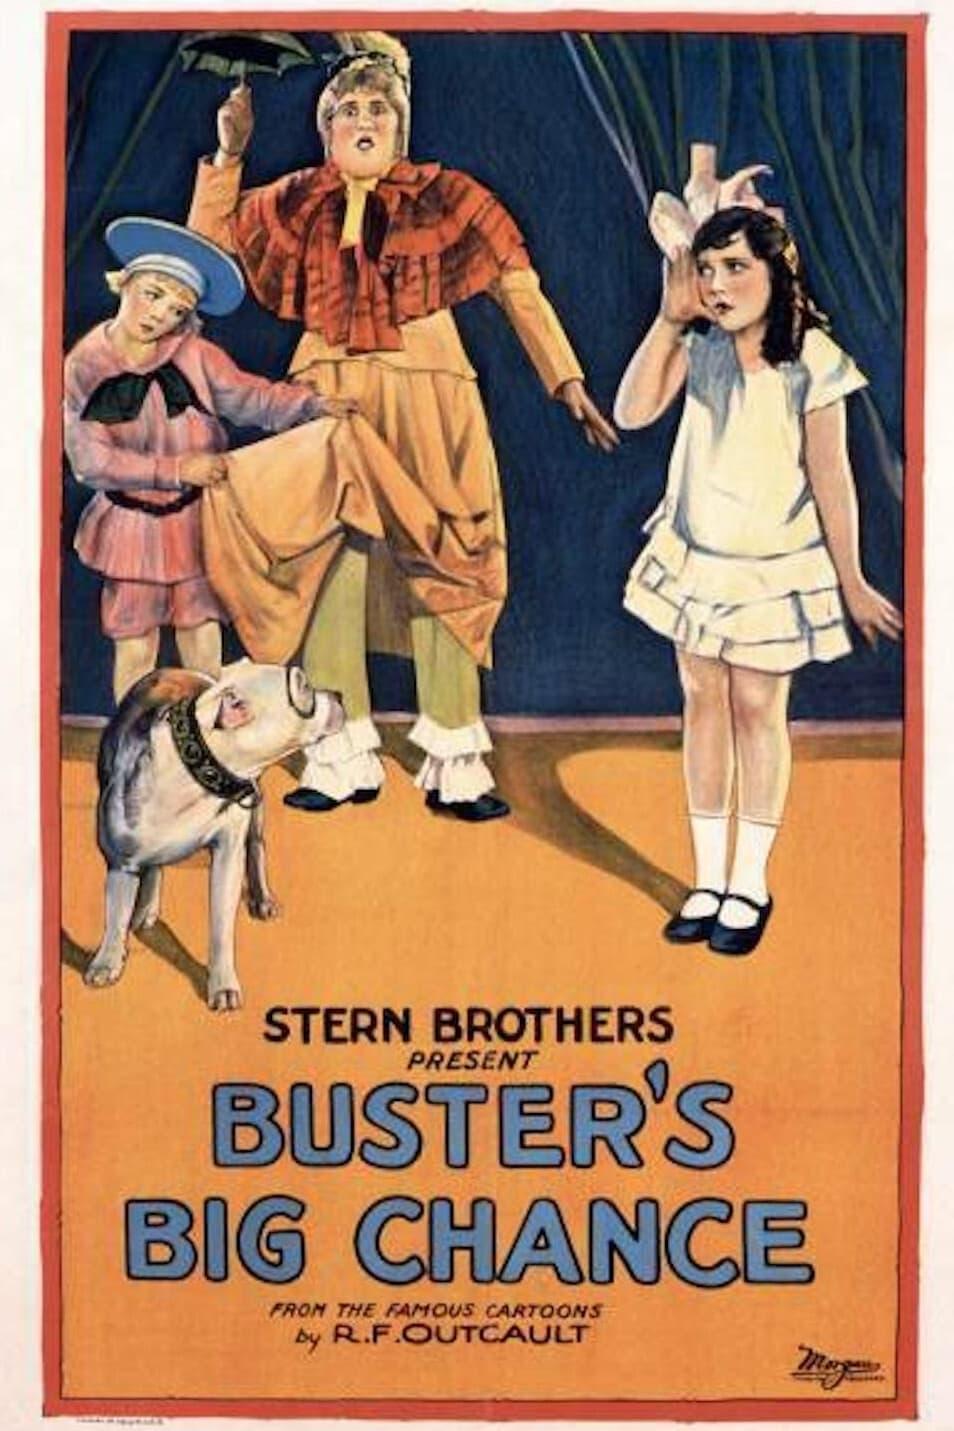 Buster's Big Chance poster